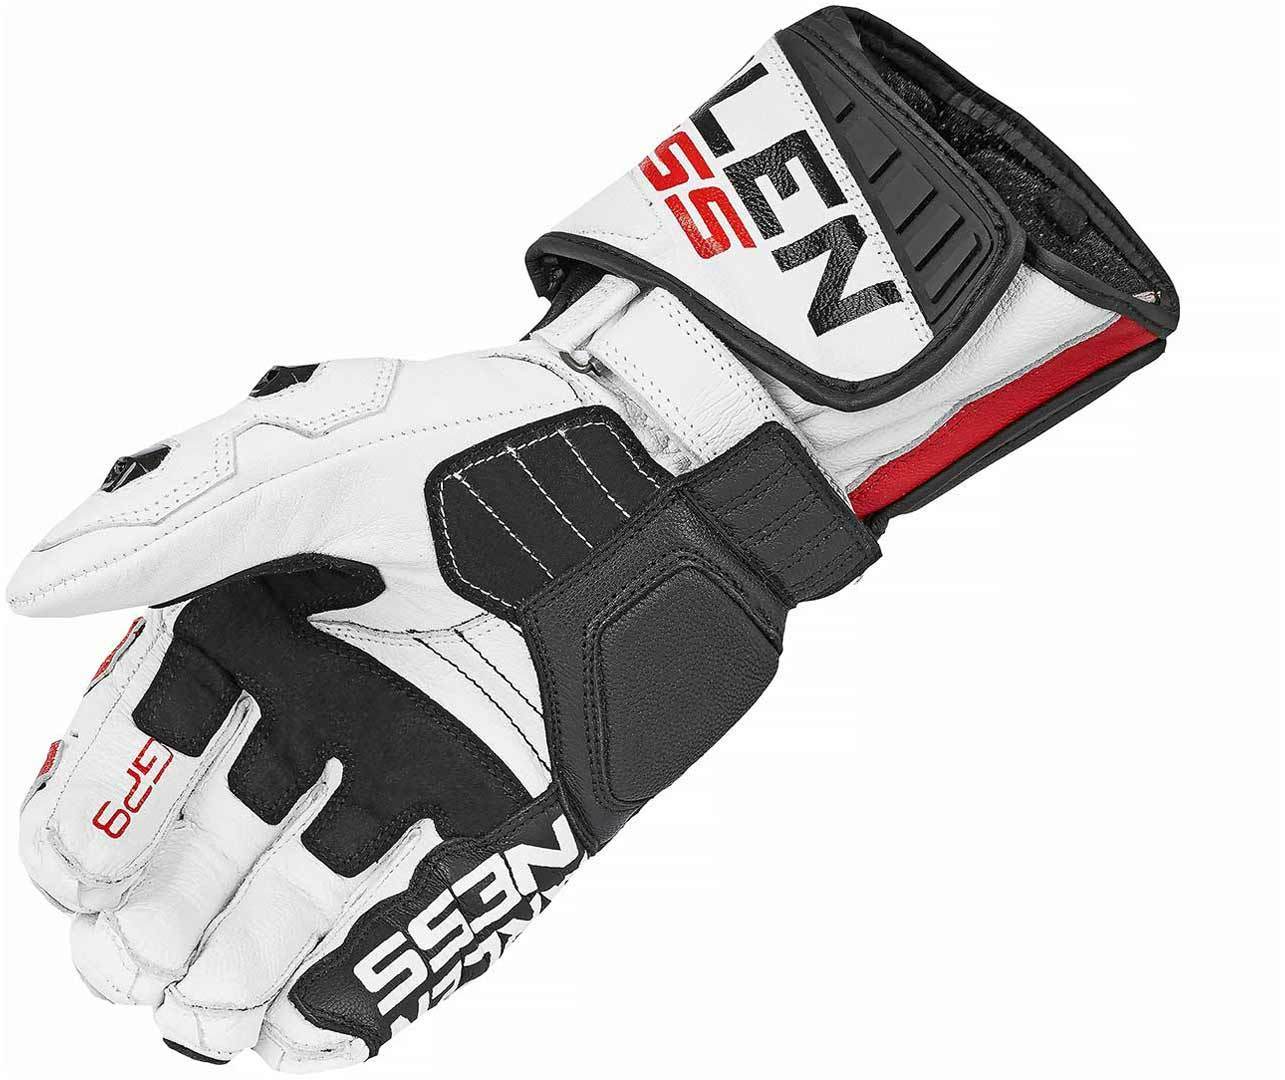 Arlen Ness Sugello Motorcycle Gloves#color_black-white-red